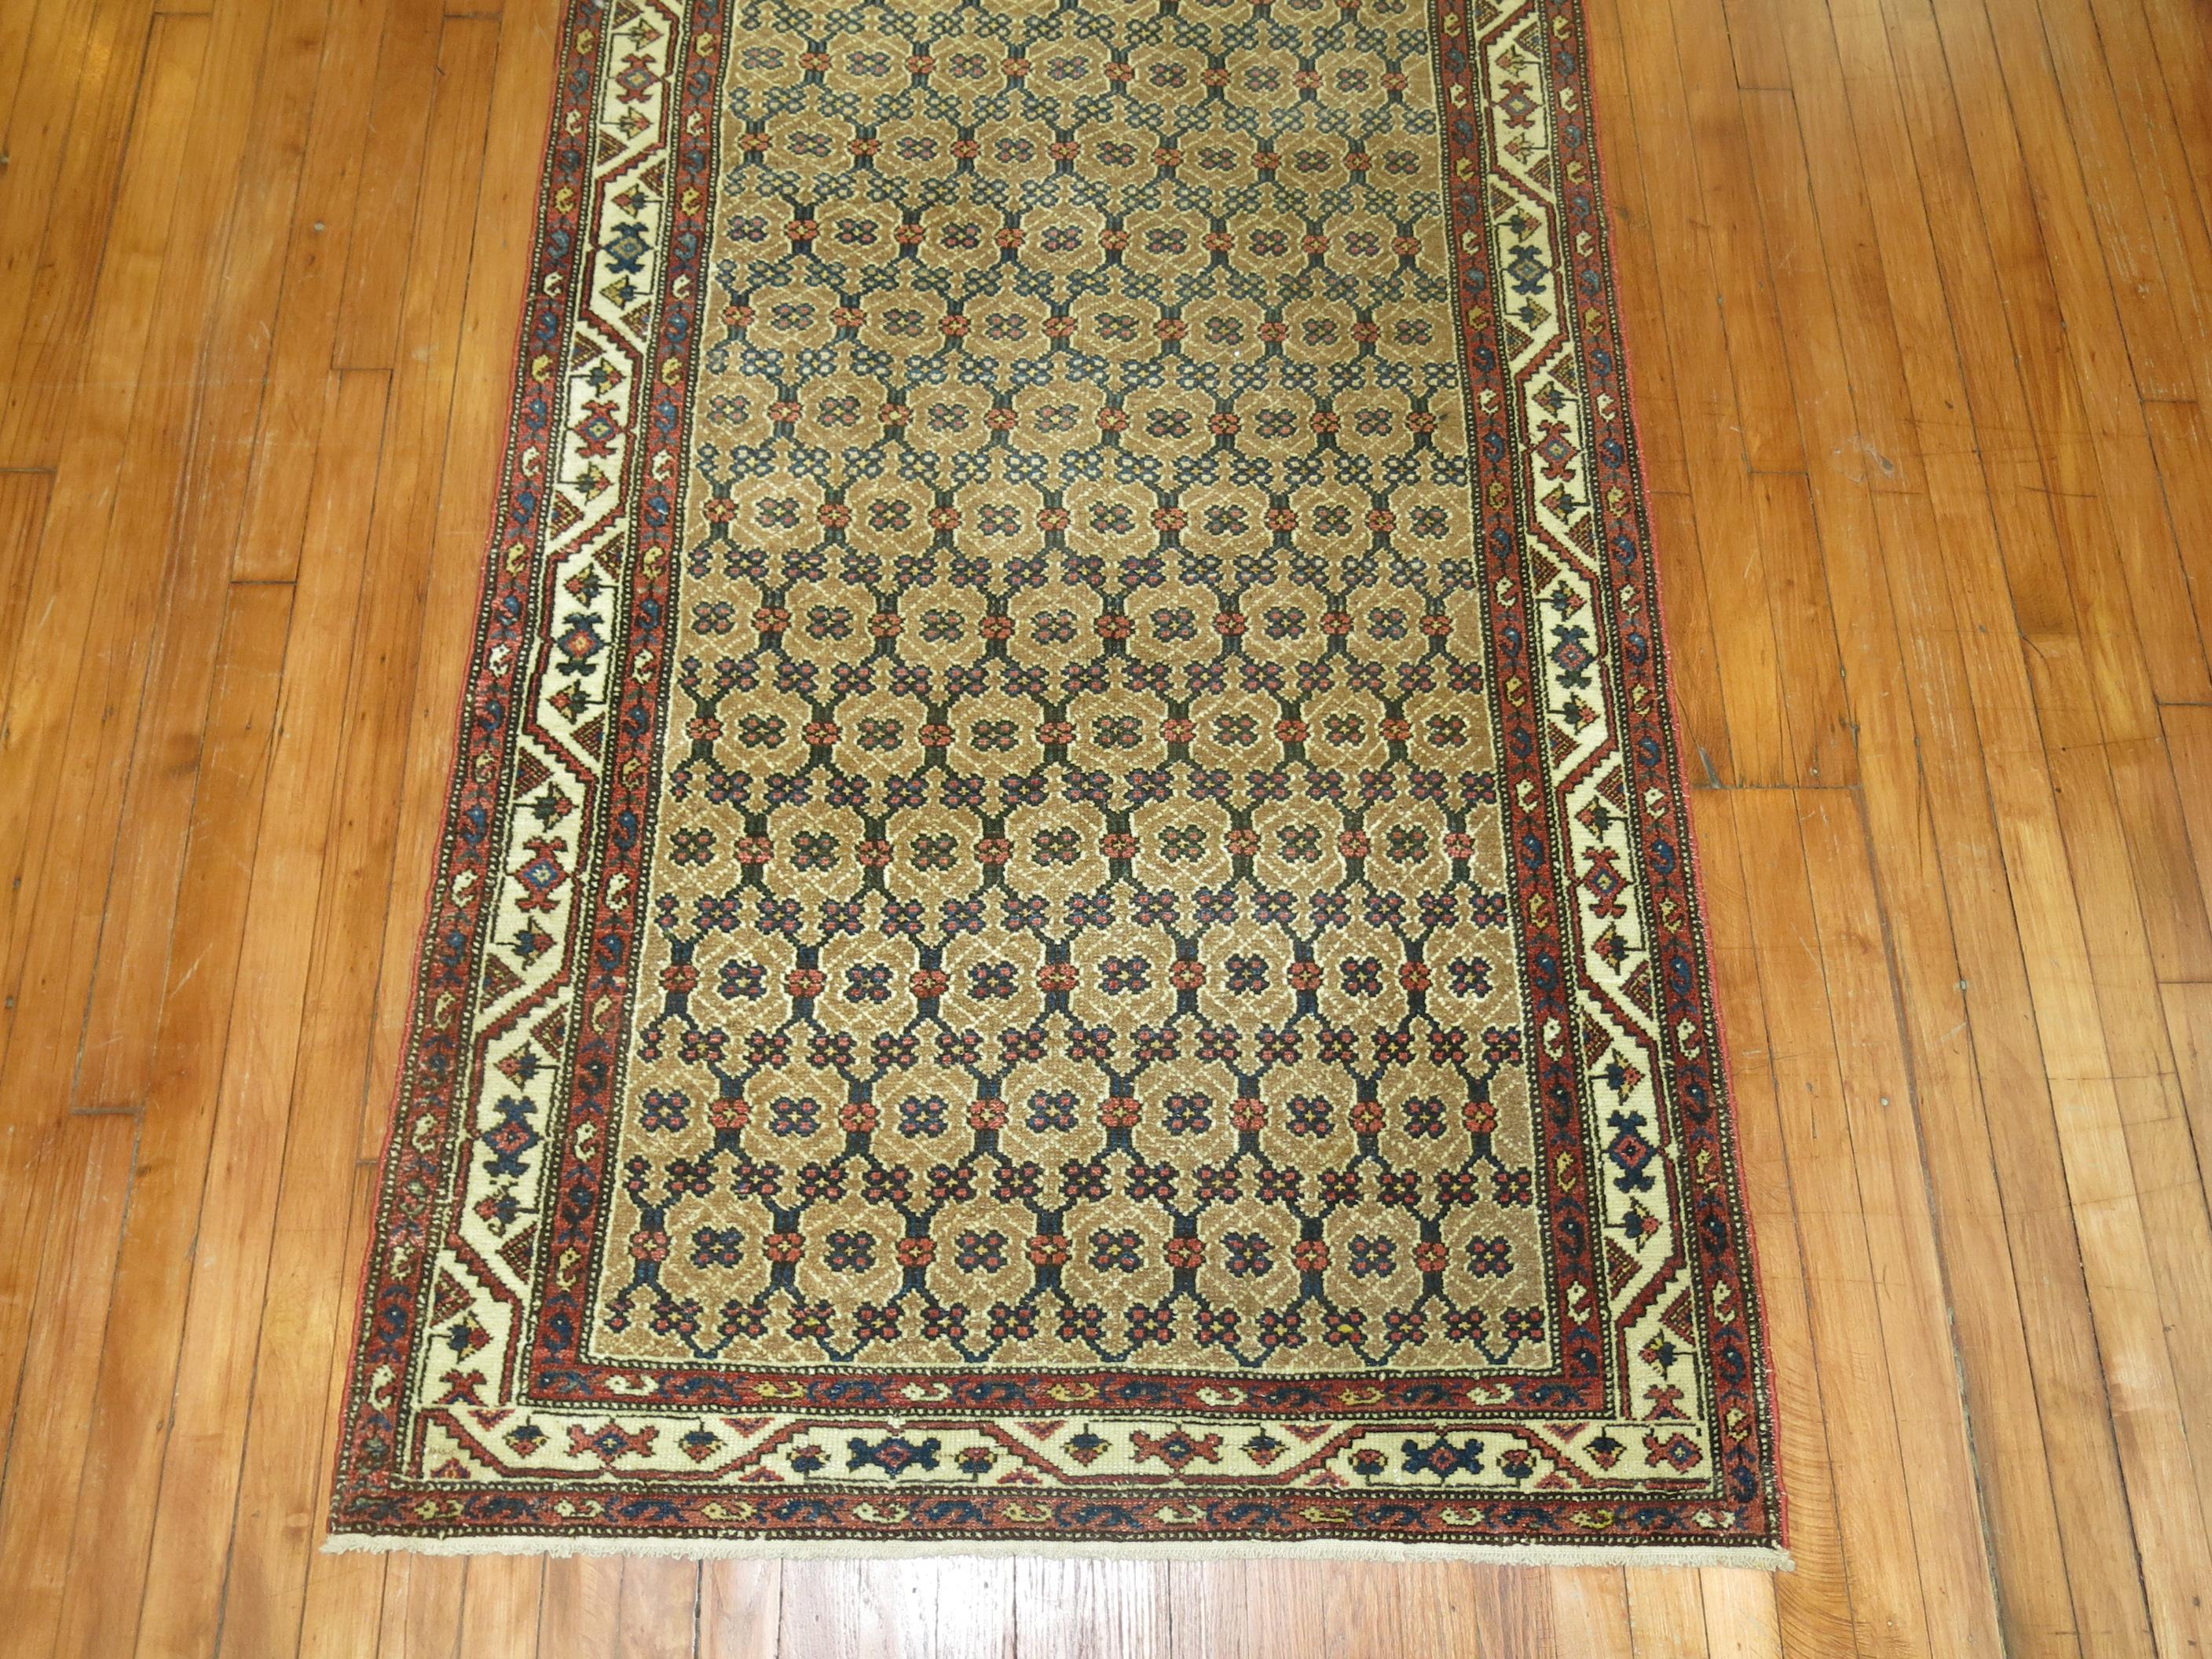 Wool Tribal Camel Color Antiqie Persian Runner